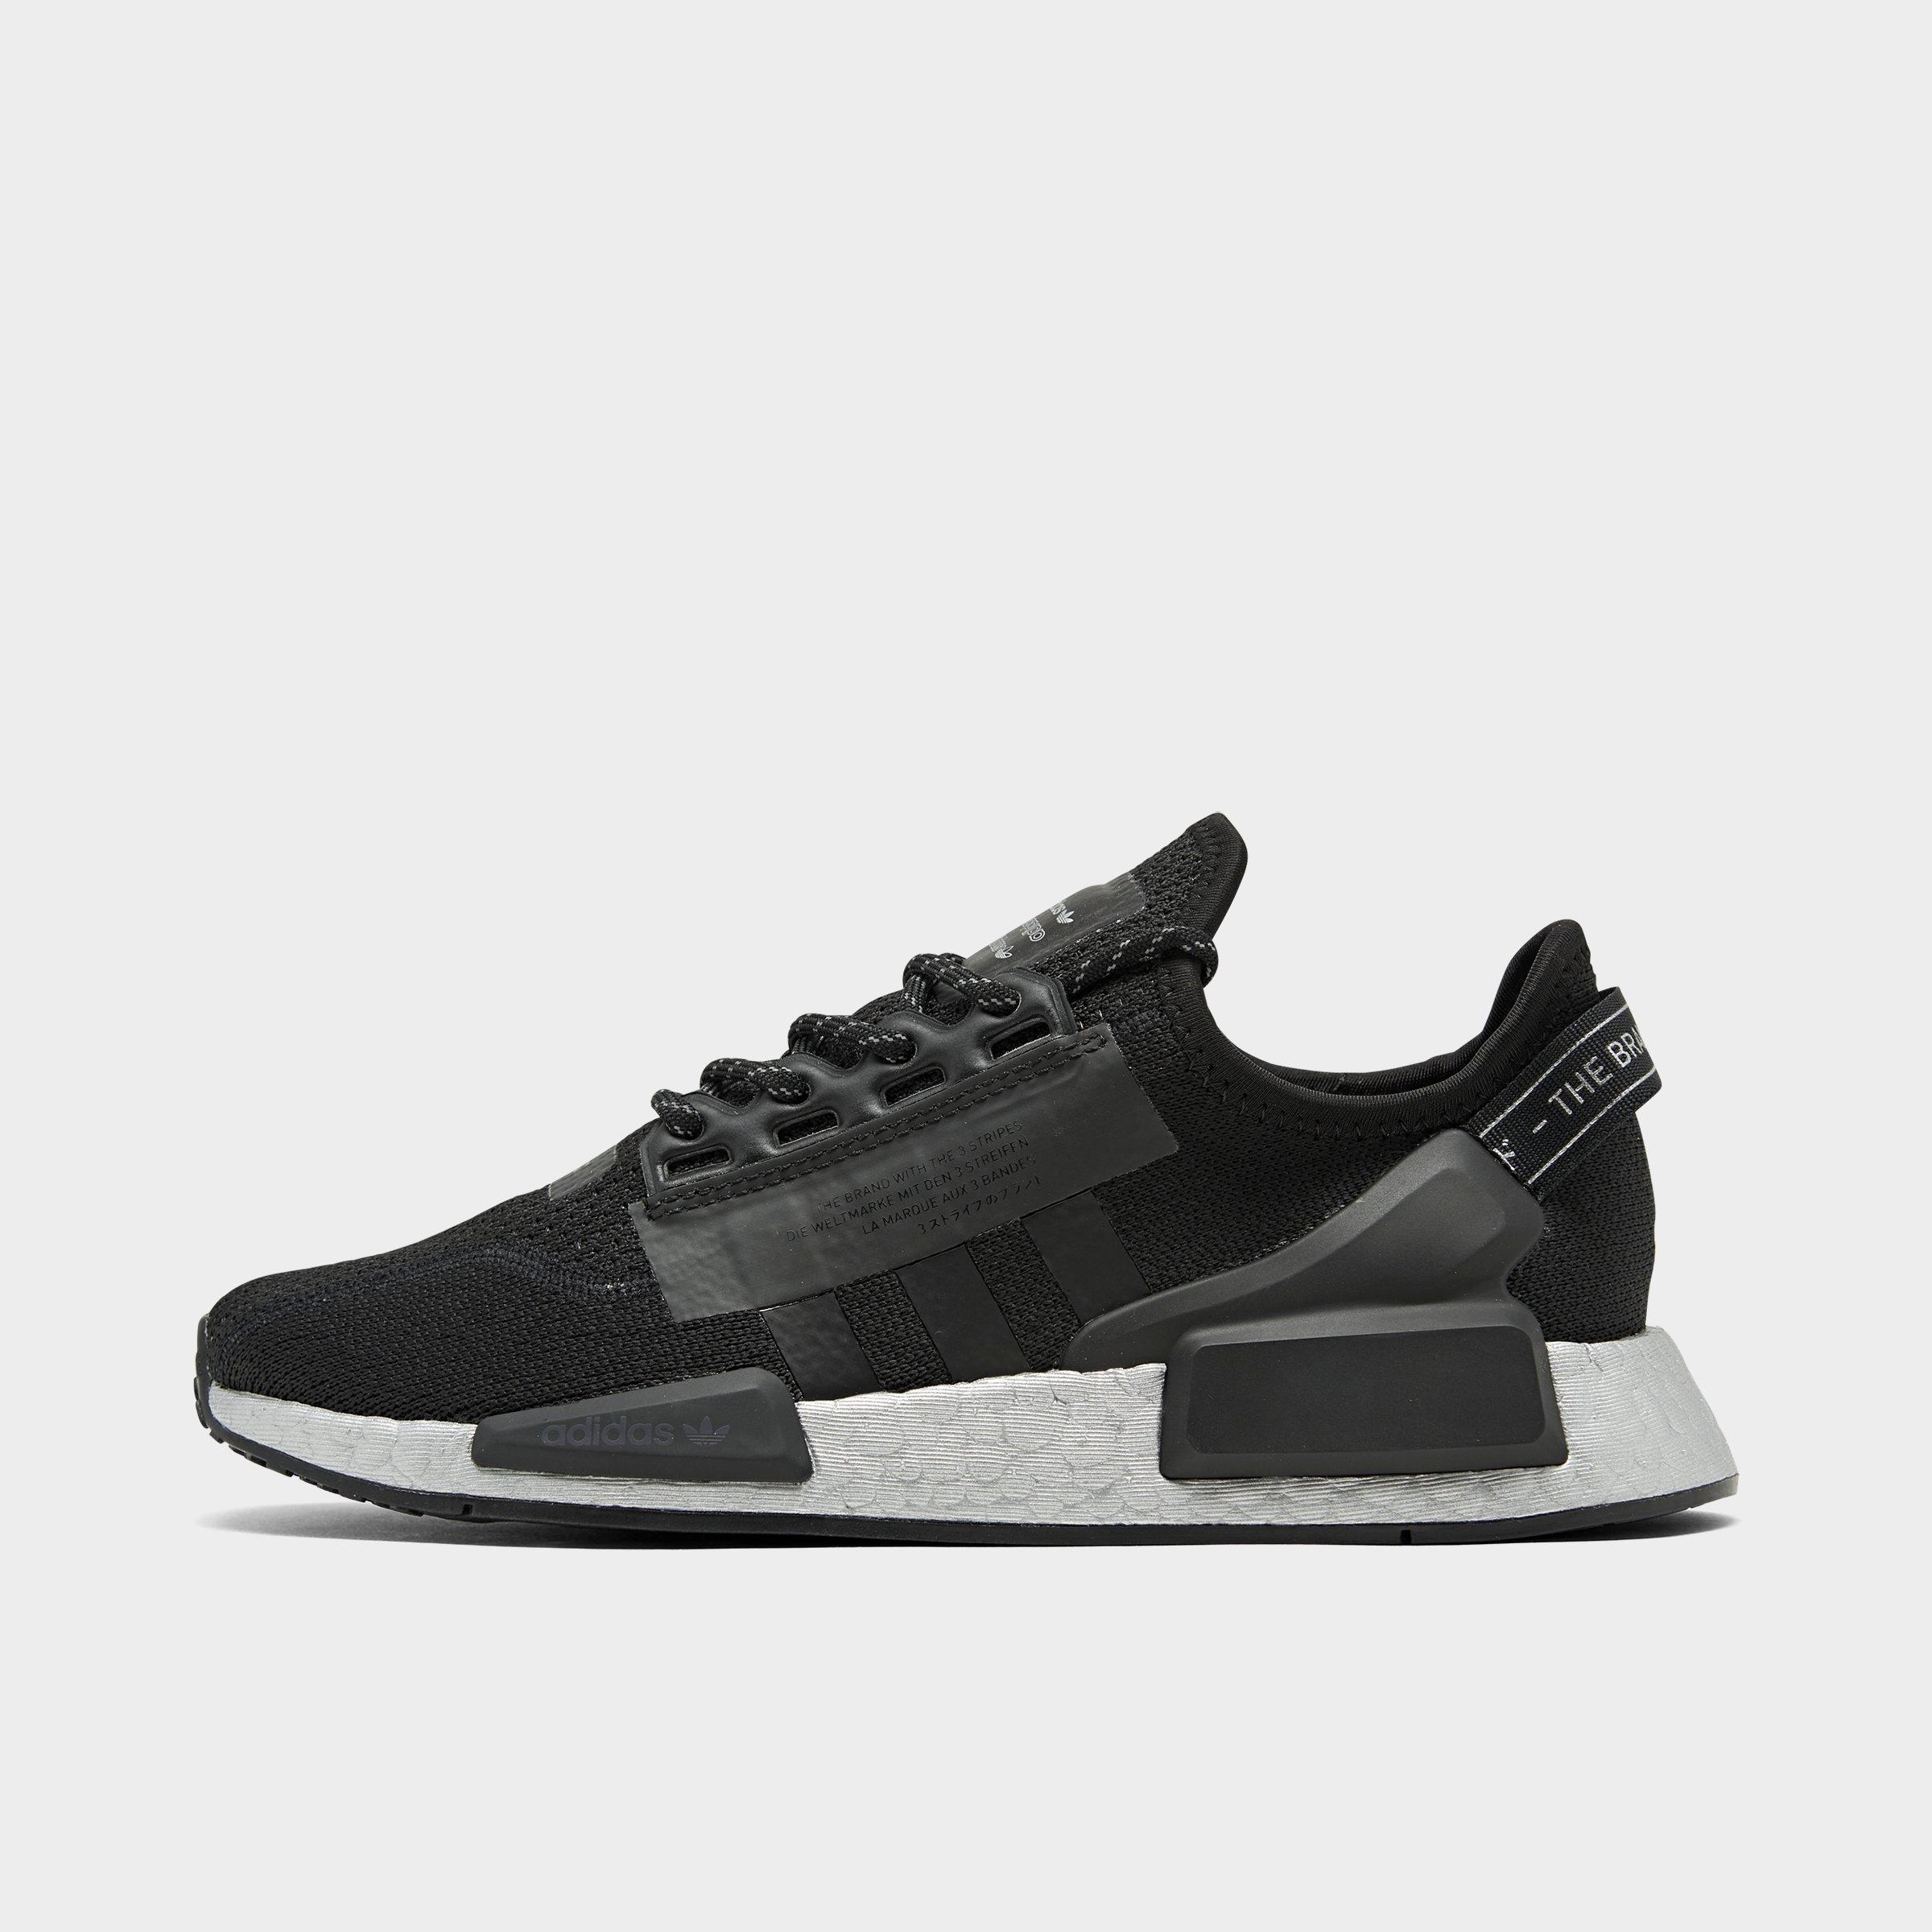 BEDWIN THE HEARTBREAKERS x adidas NMD R1